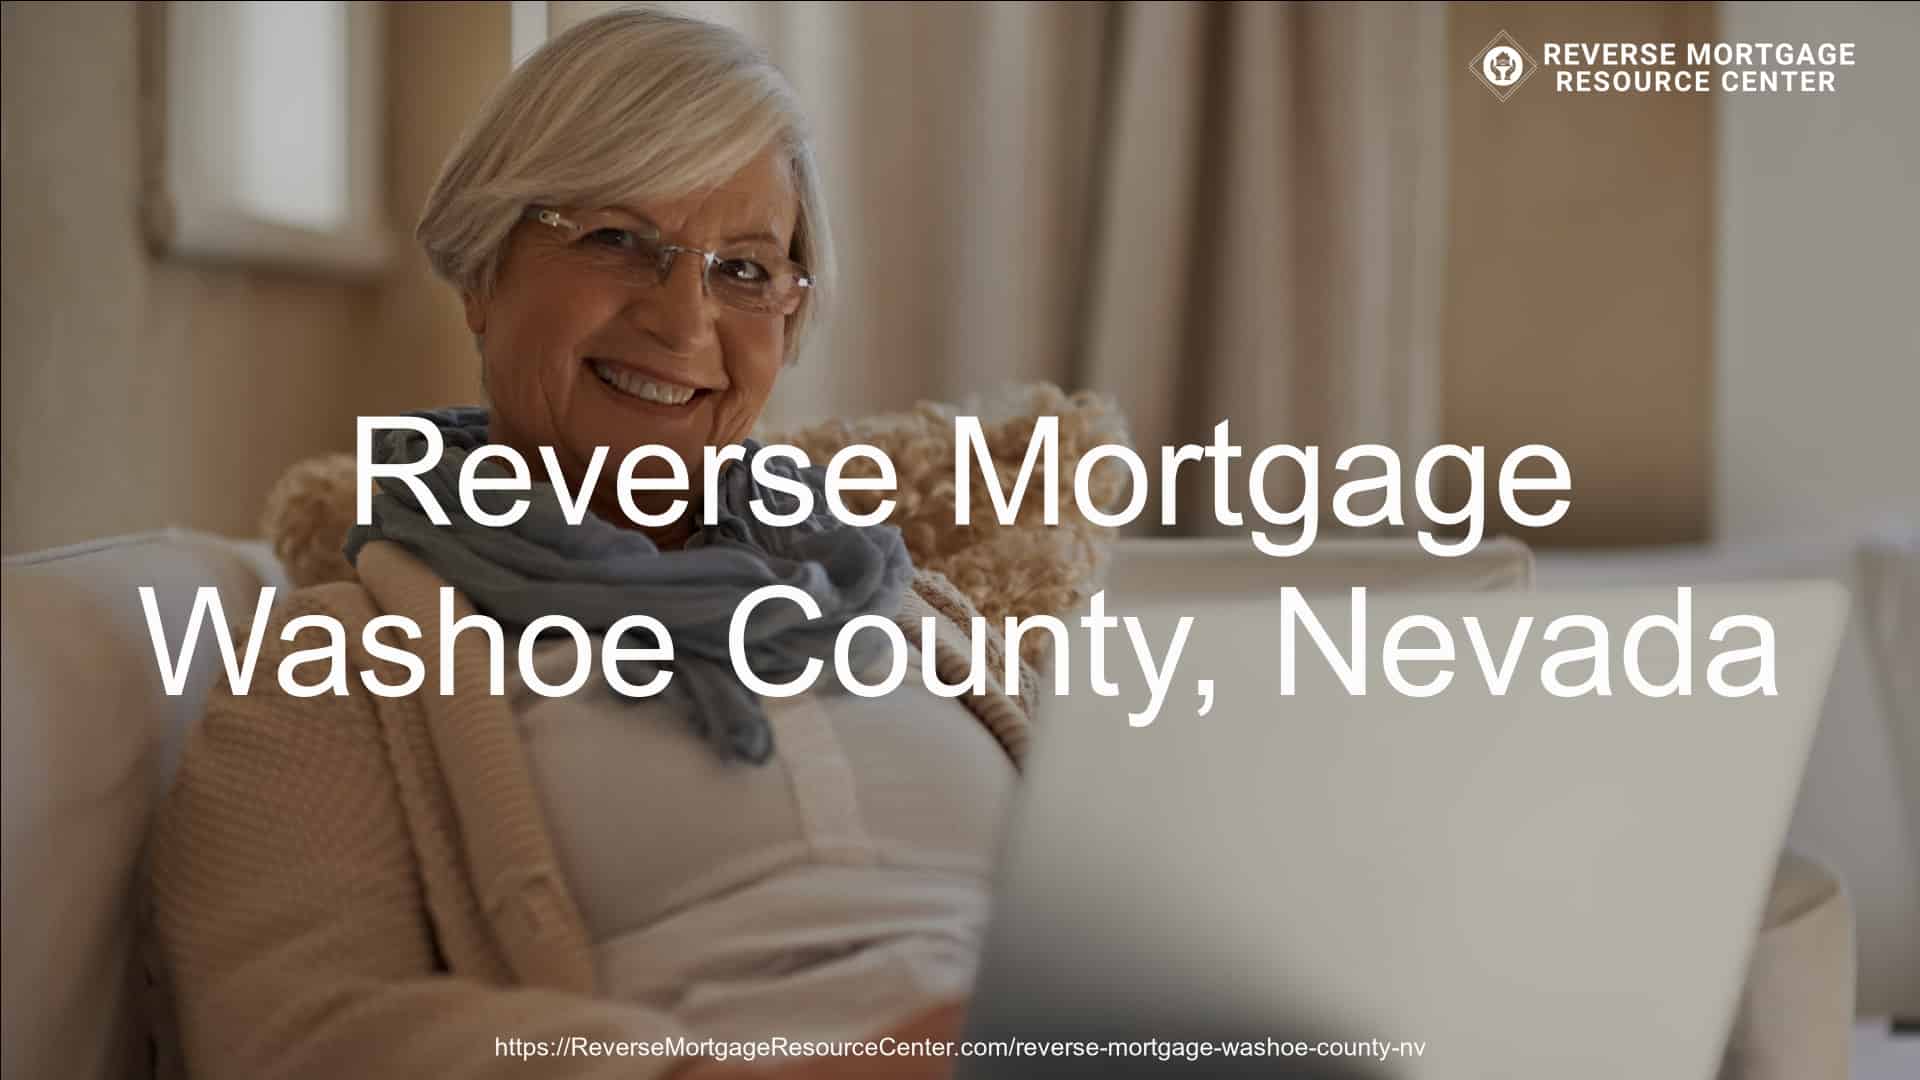 Reverse Mortgage Loans in Washoe County Nevada